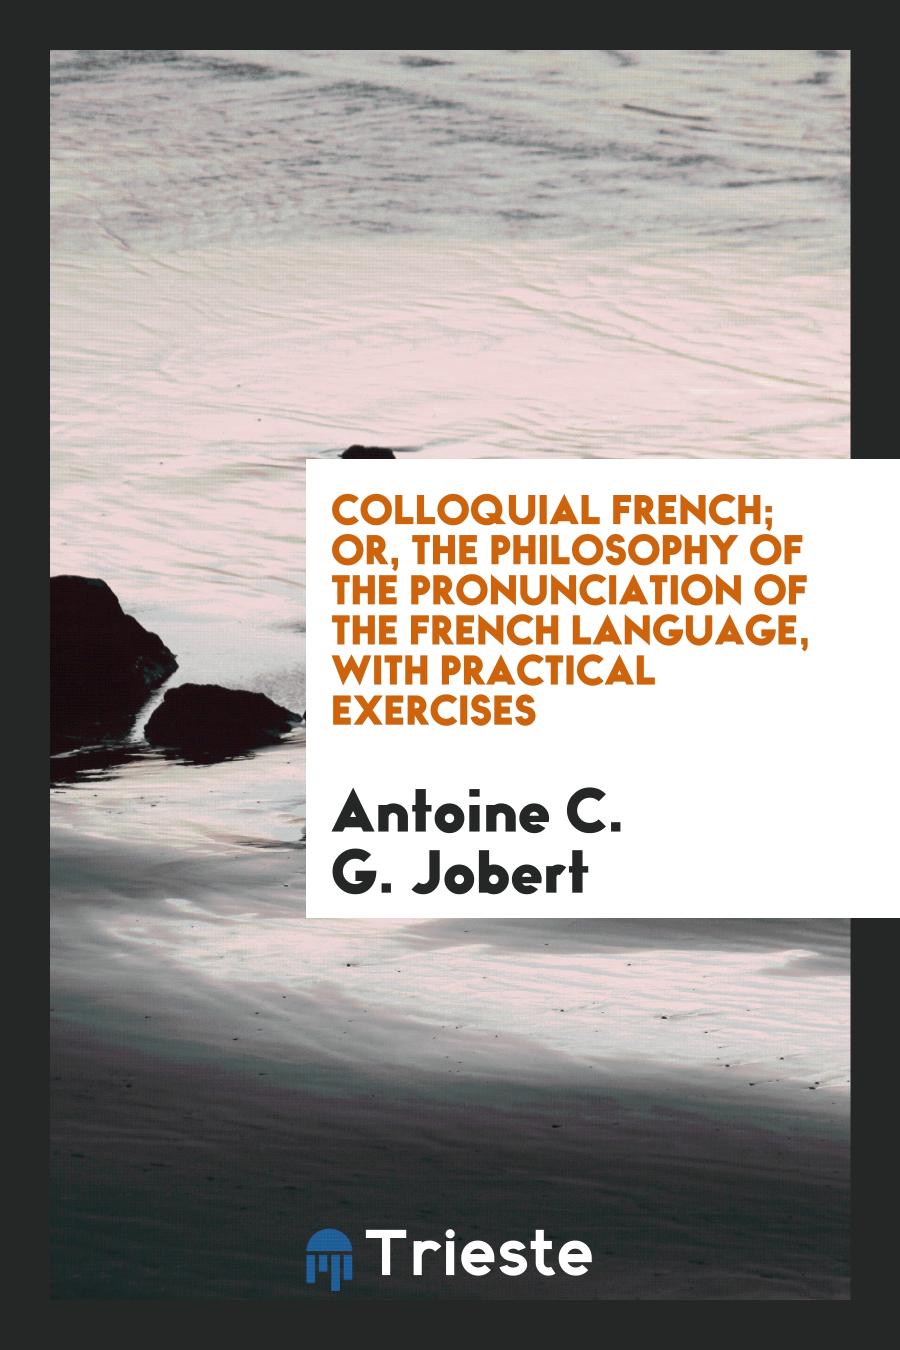 Colloquial French; Or, the Philosophy of the Pronunciation of the French Language, with Practical Exercises